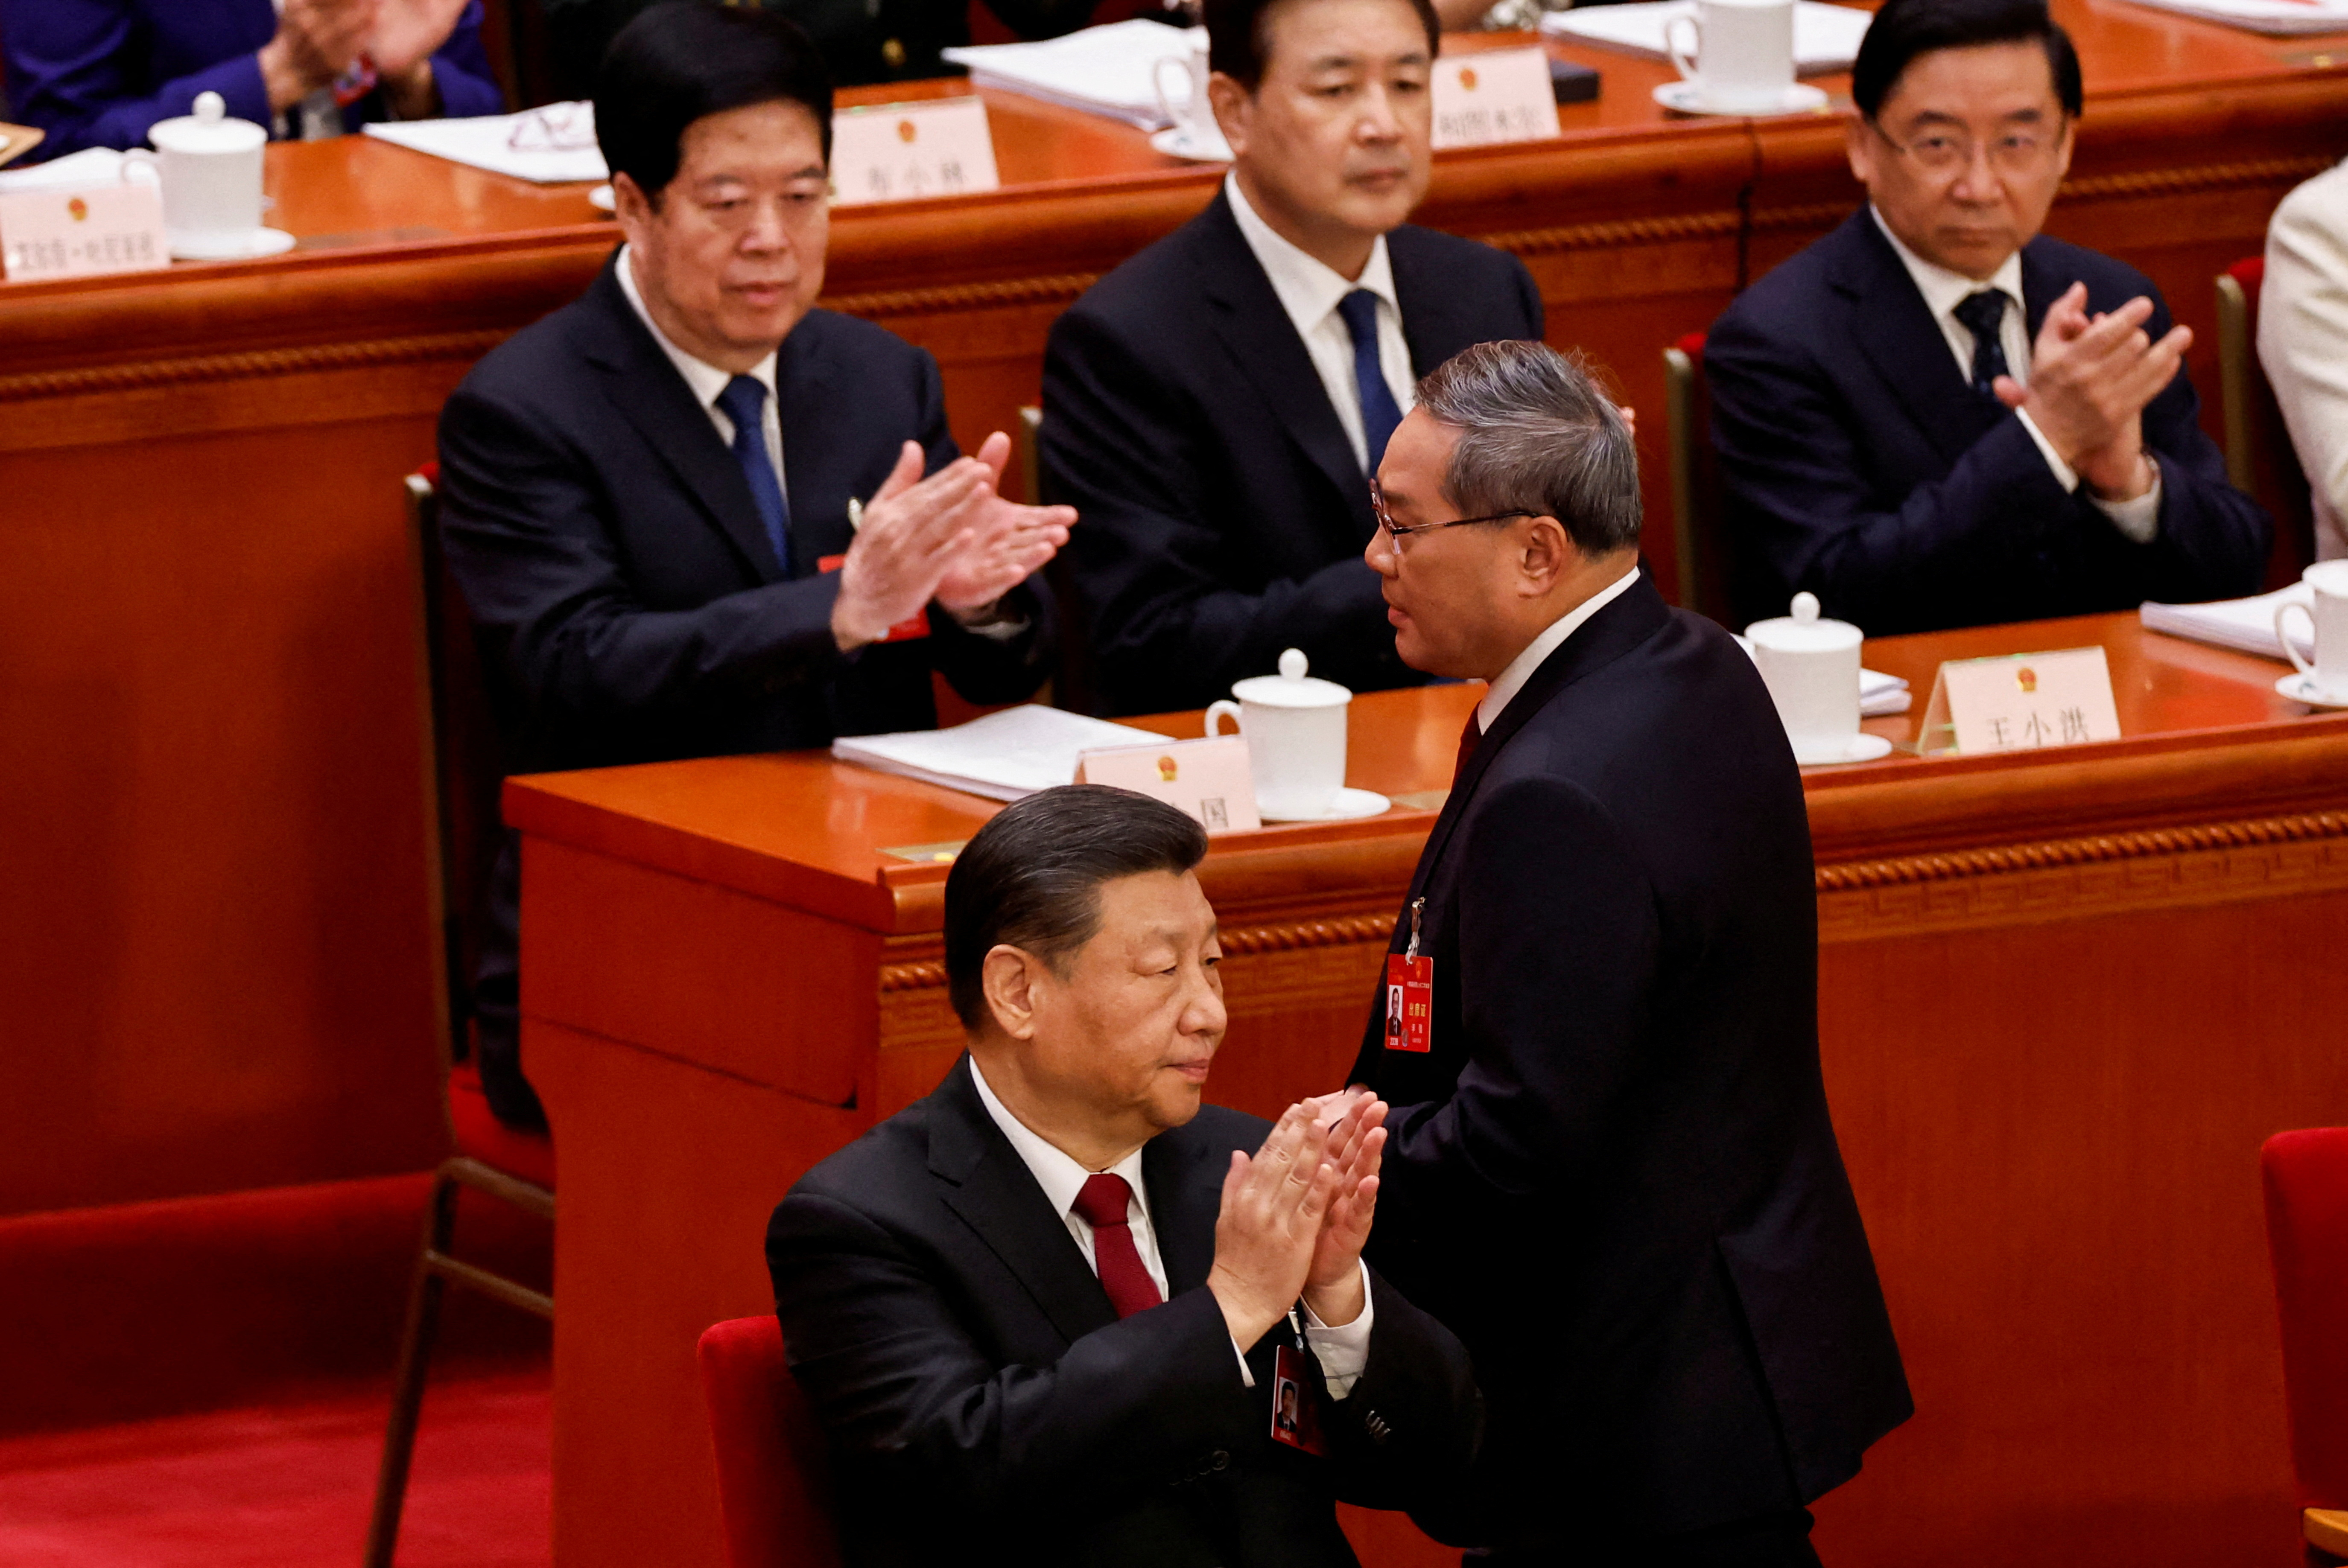 Opening session of the National People's Congress (NPC) at the Great Hall of the People in Beijing